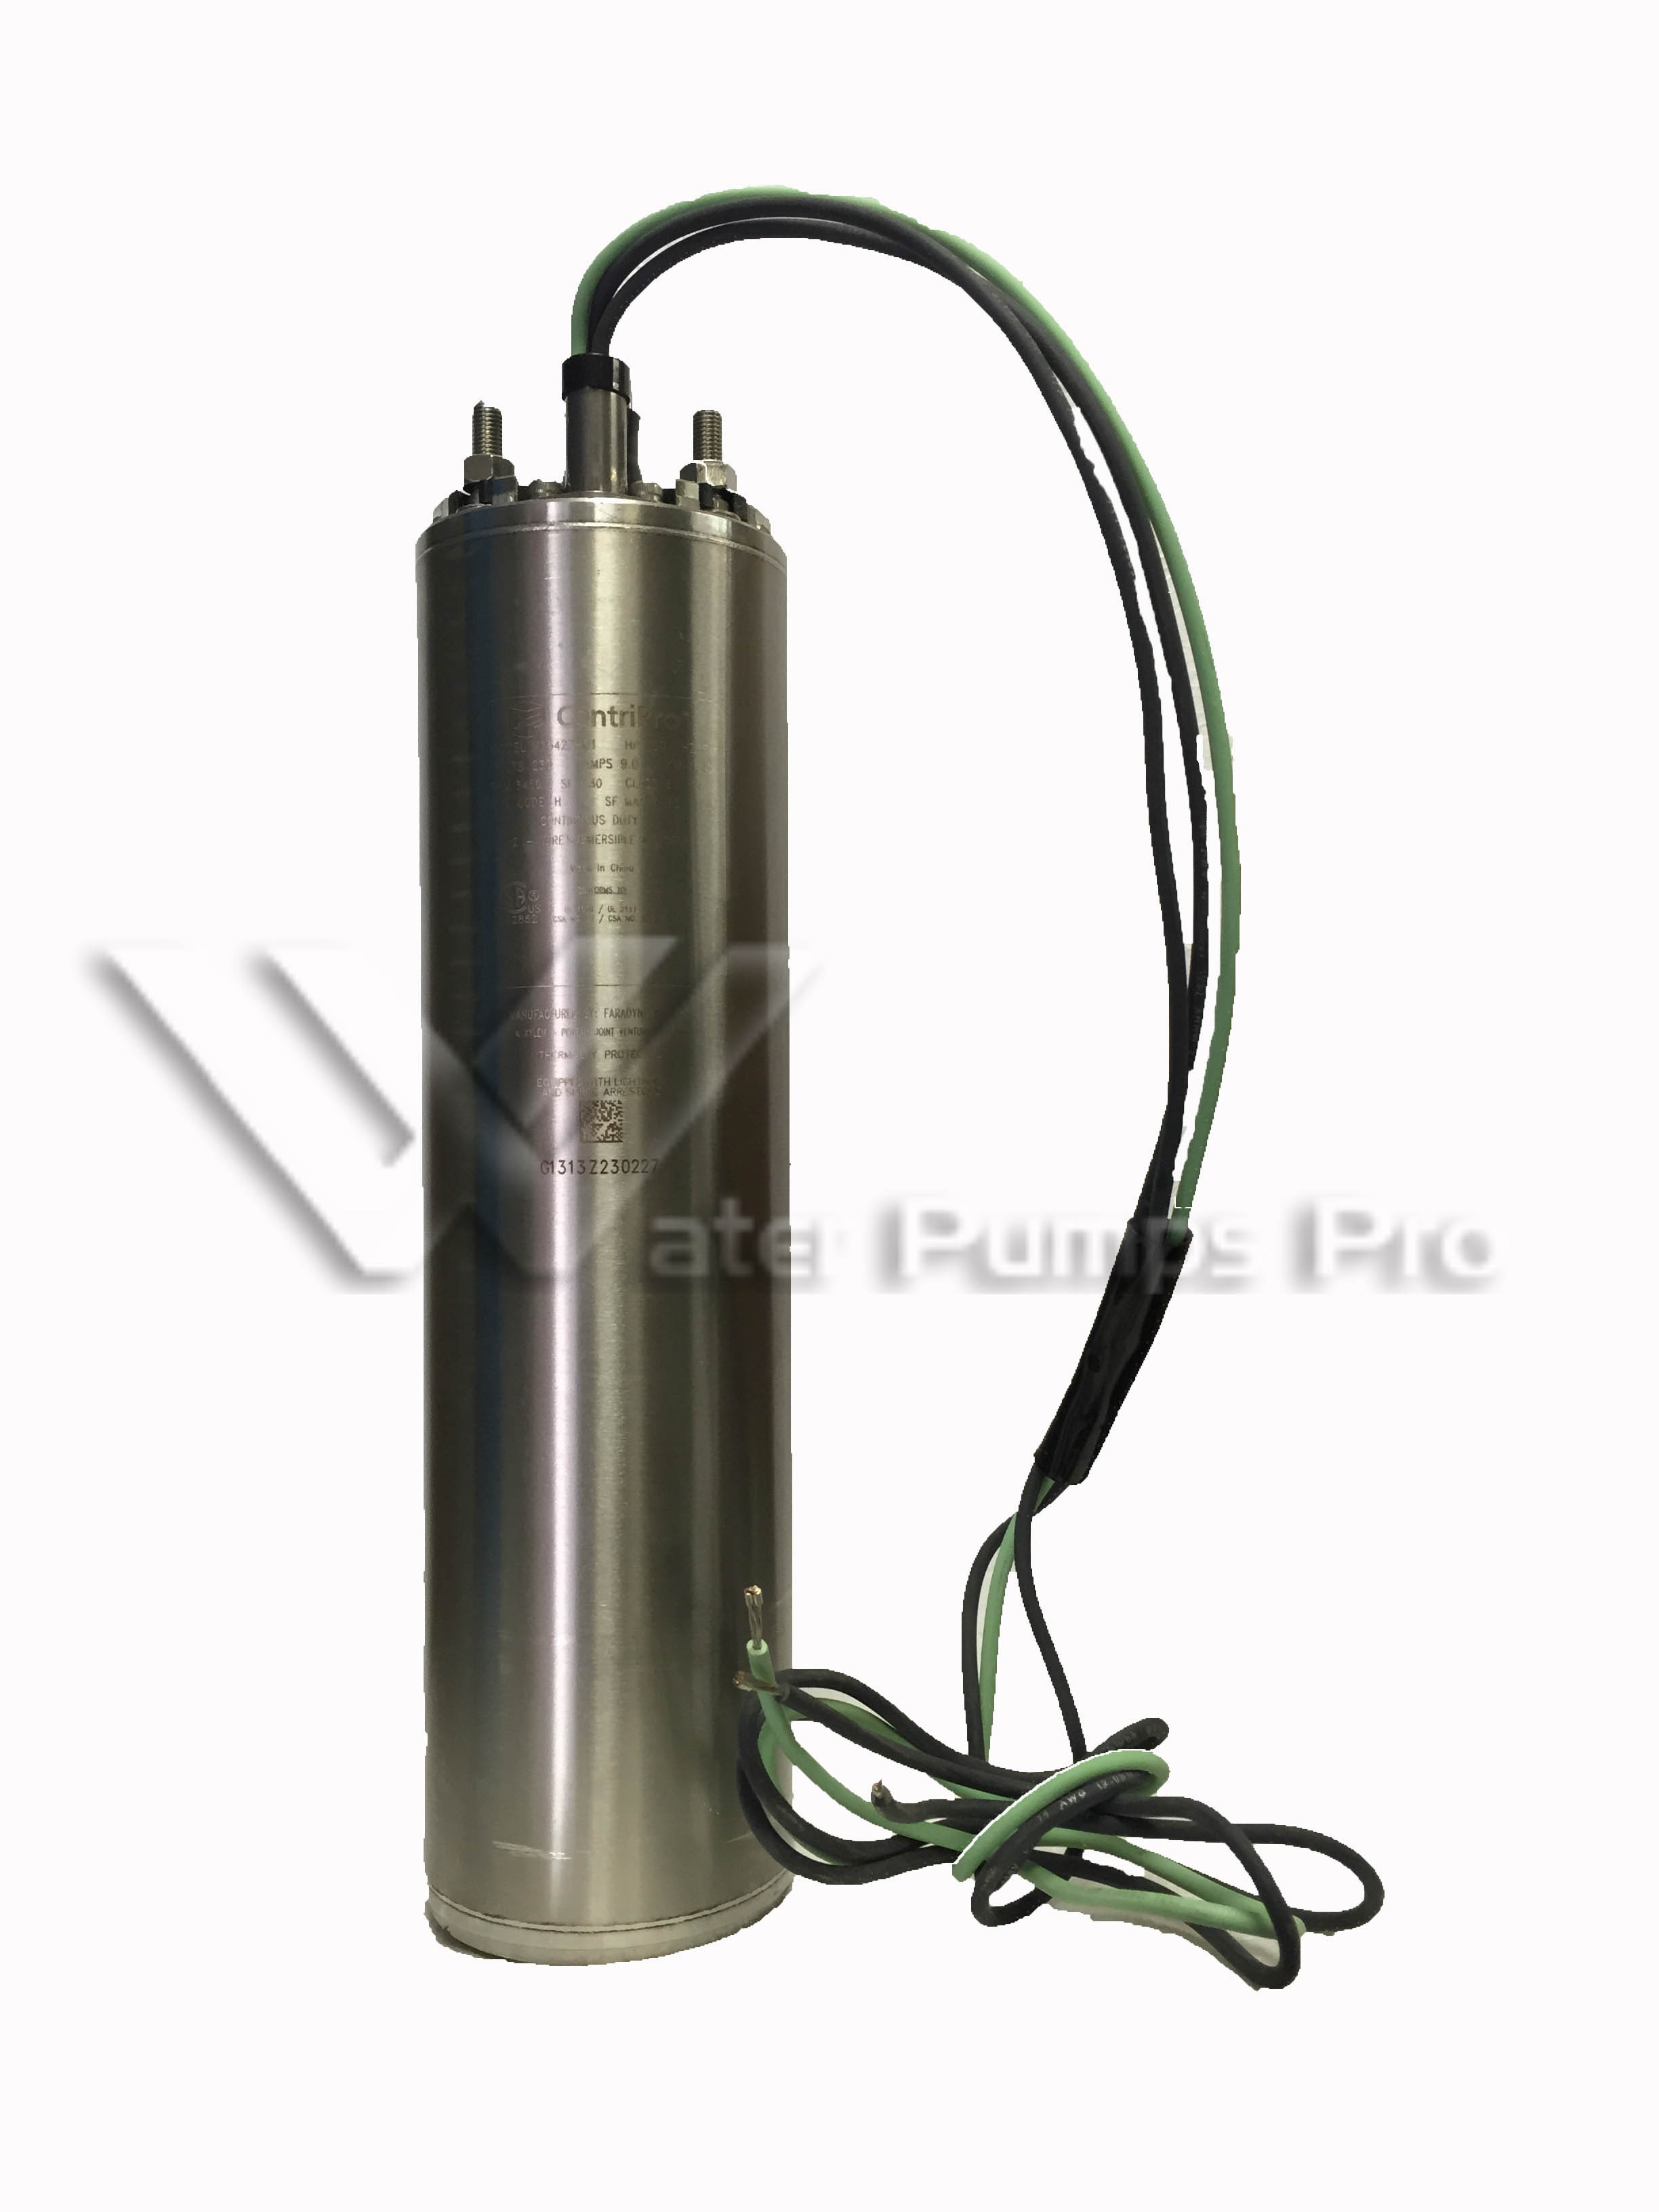 Goulds M15422 1.5HP 4" Submersible Motor 230V 2Wire 1Phase 60 Hz - Click Image to Close